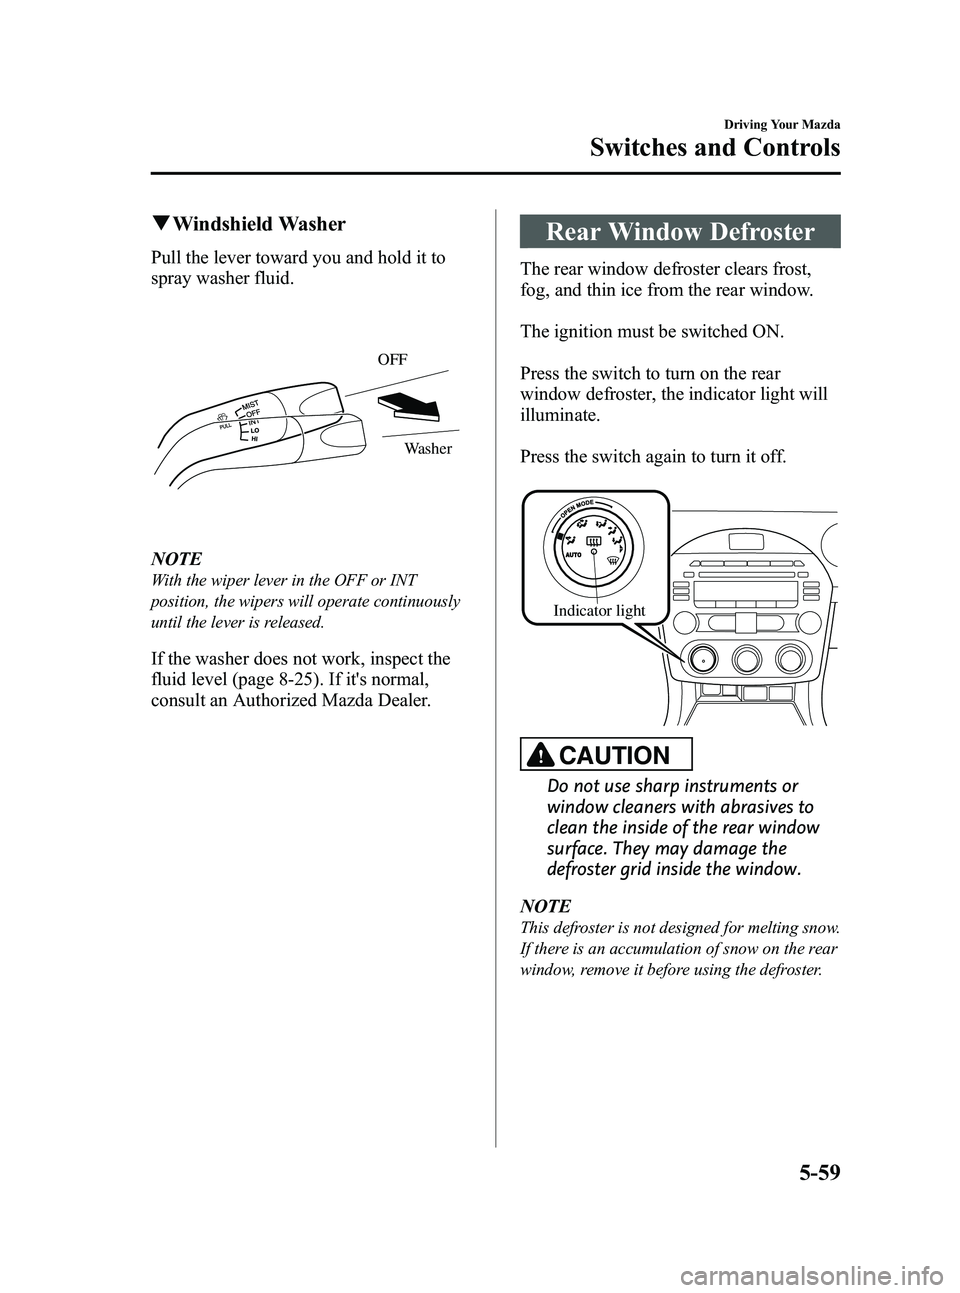 MAZDA MODEL MX-5 MIATA PRHT 2013  Owners Manual Black plate (203,1)
qWindshield Washer
Pull the lever toward you and hold it to
spray washer fluid.
OFF
Washer
NOTE
With the wiper lever in the OFF or INT
position, the wipers will operate continuousl